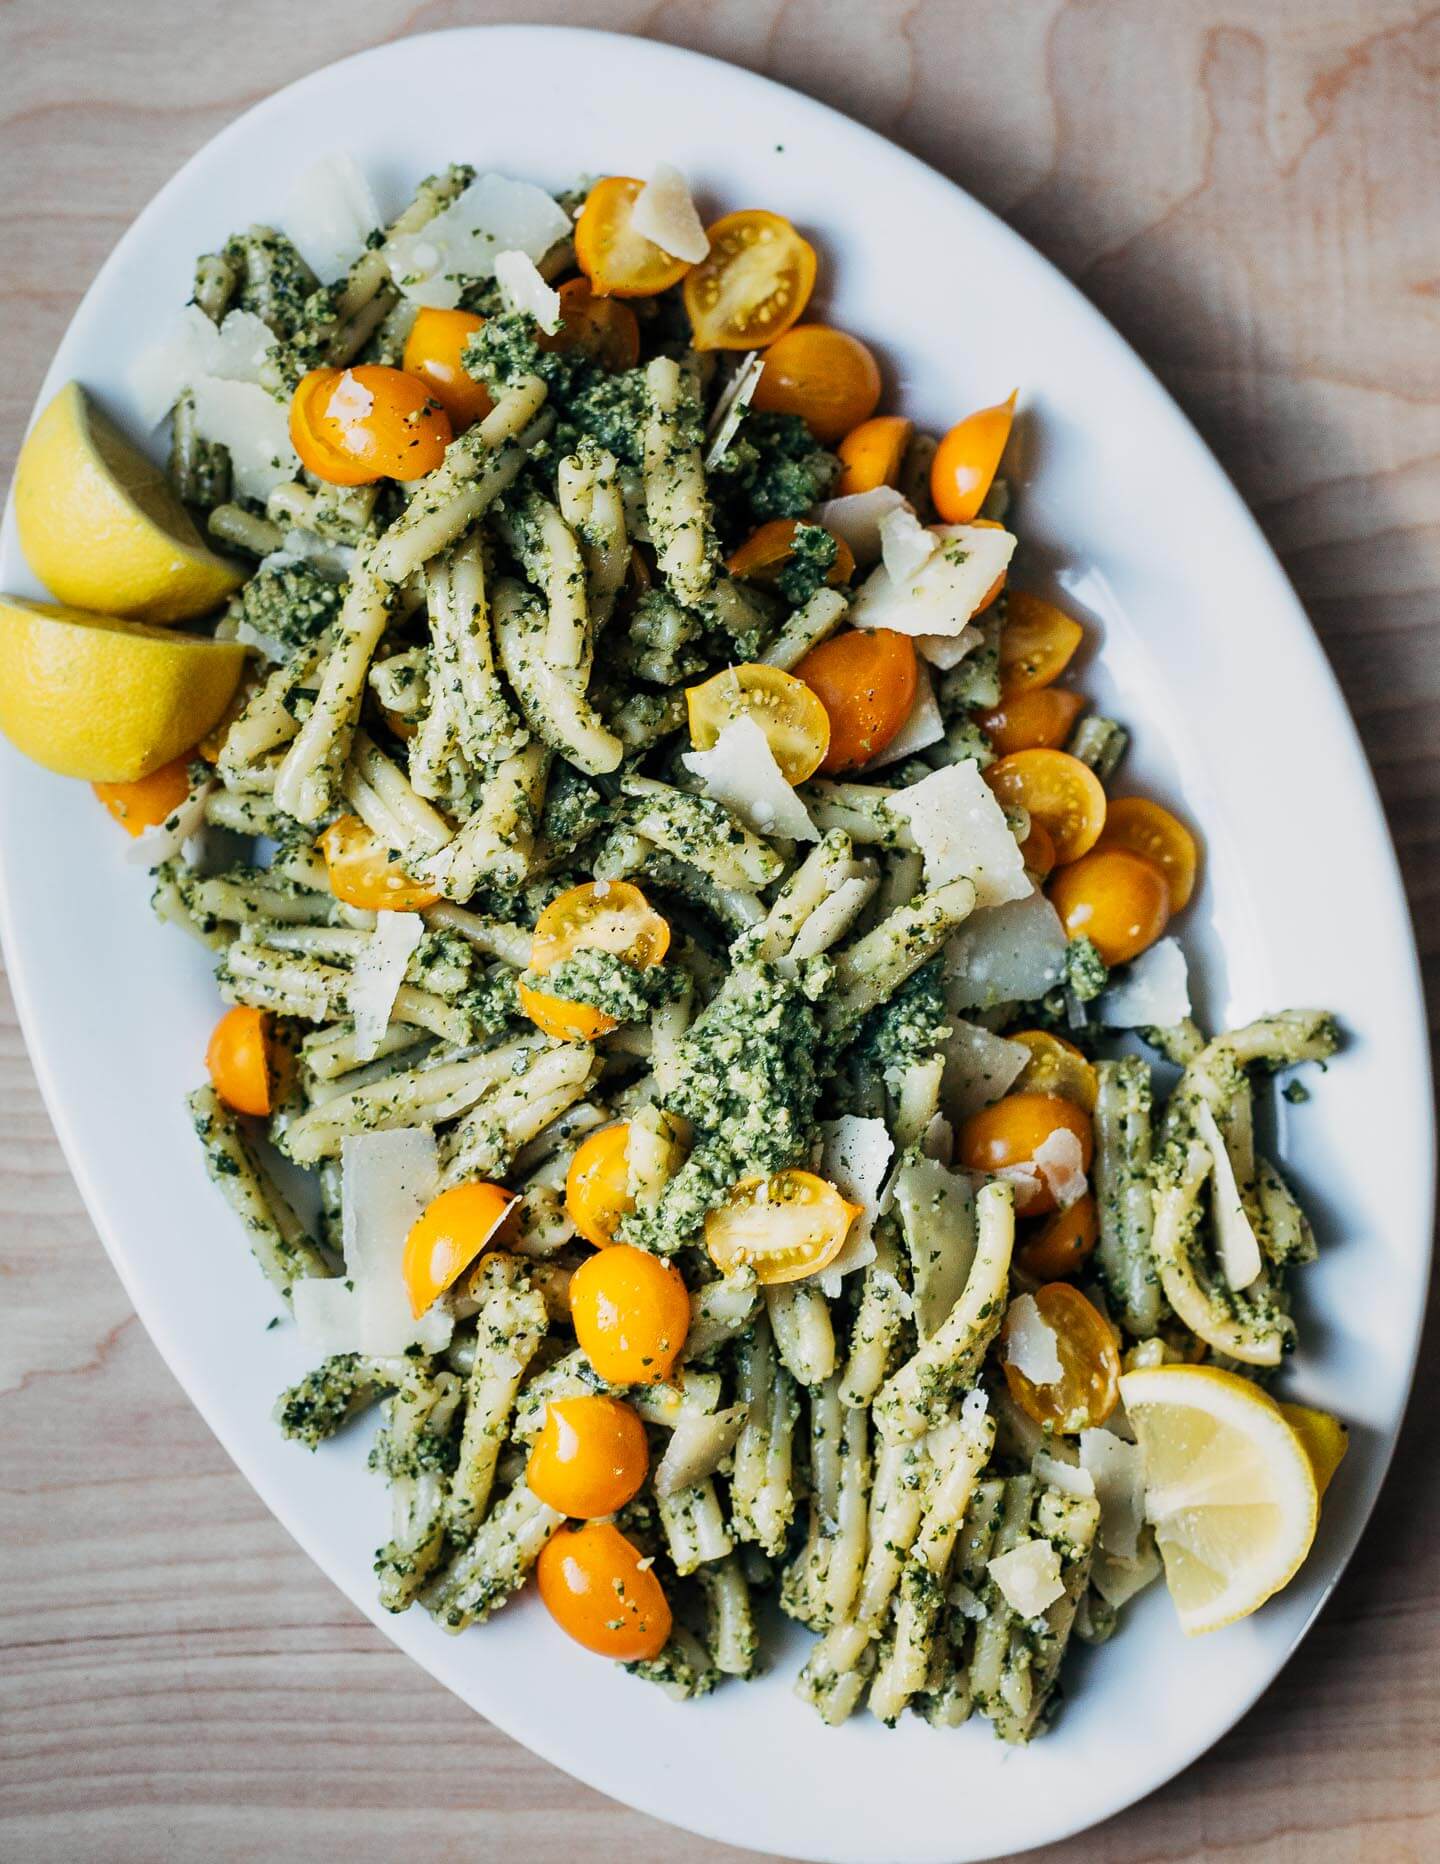 Nutty zucchini pesto with fresh basil leaves, toasted garlic, and crumbled Parmesan is just the thing to toss with noodles for a quick late summer dinner. 